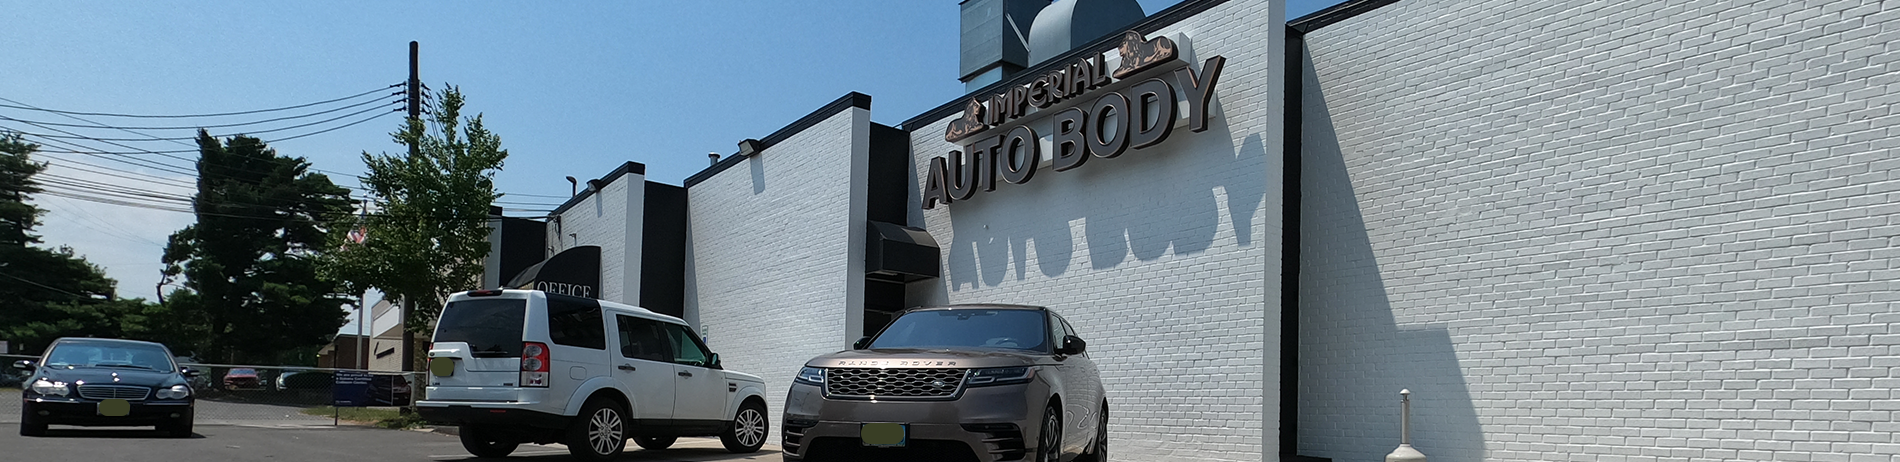 Imperial Auto Body of Rockville